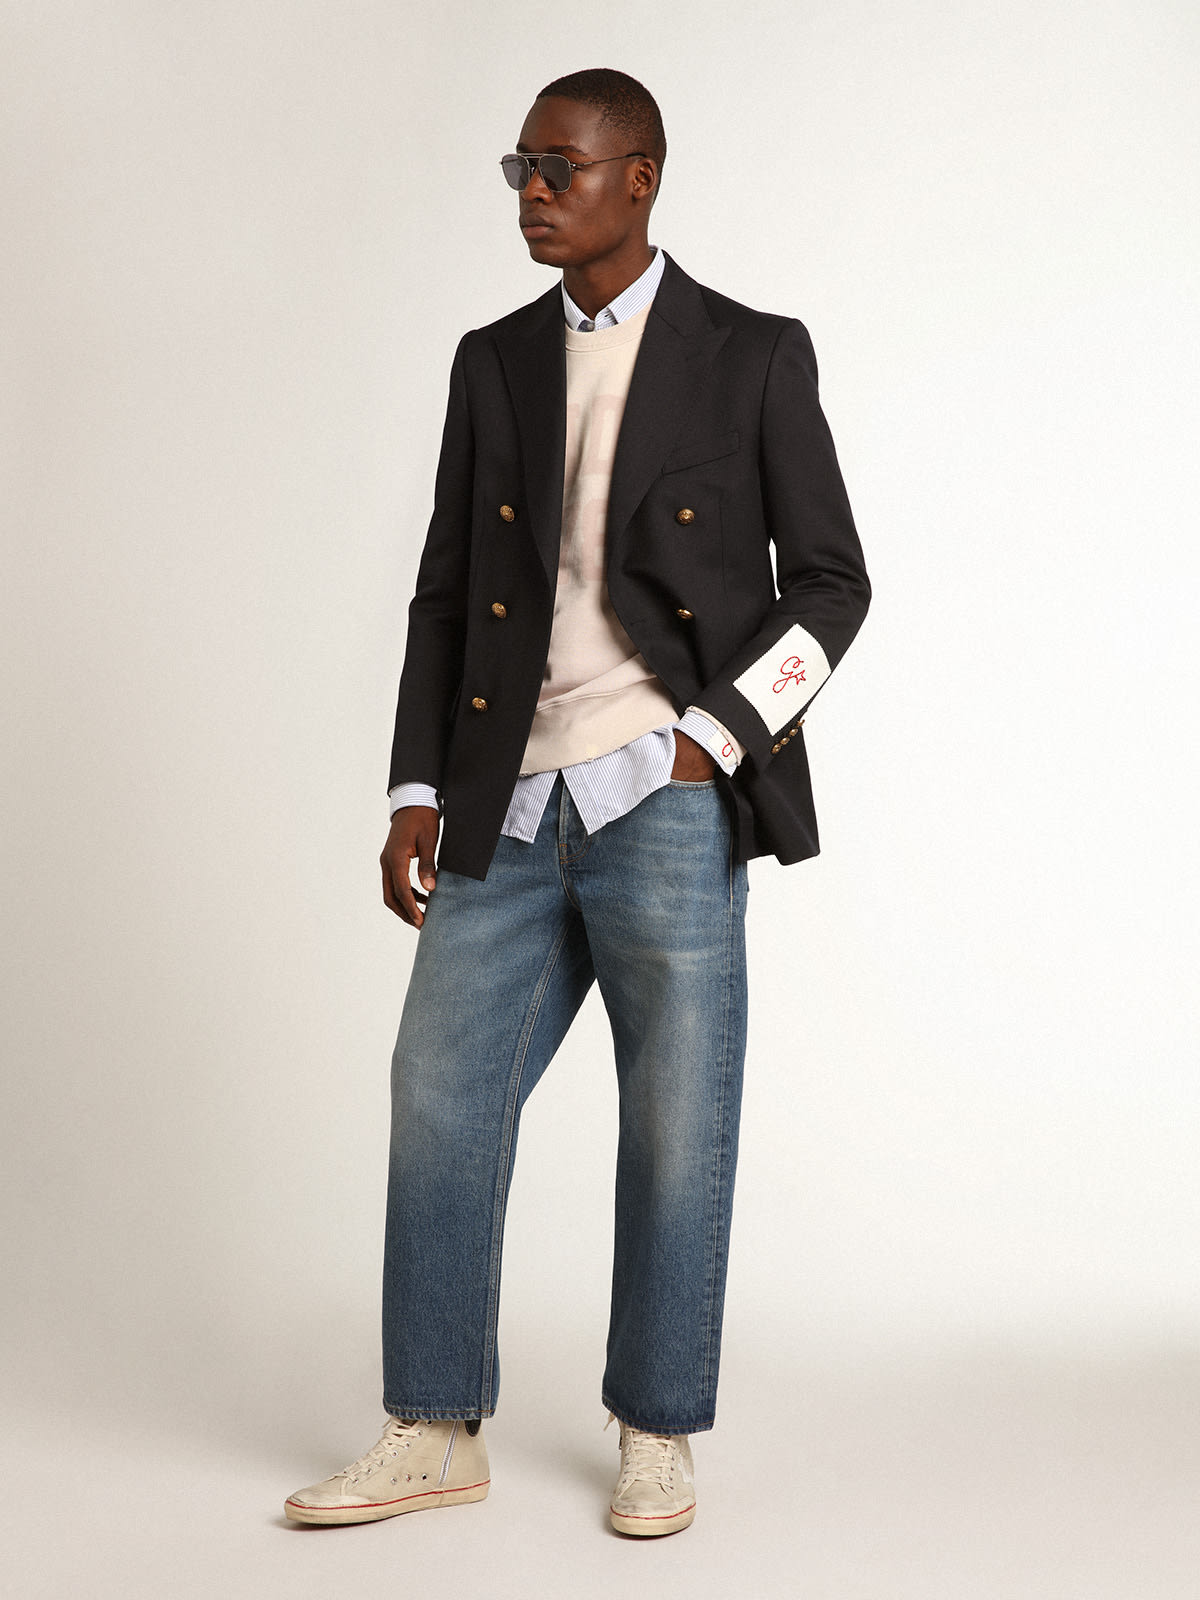 Golden Goose - Stonewashed-effect blue jeans in 